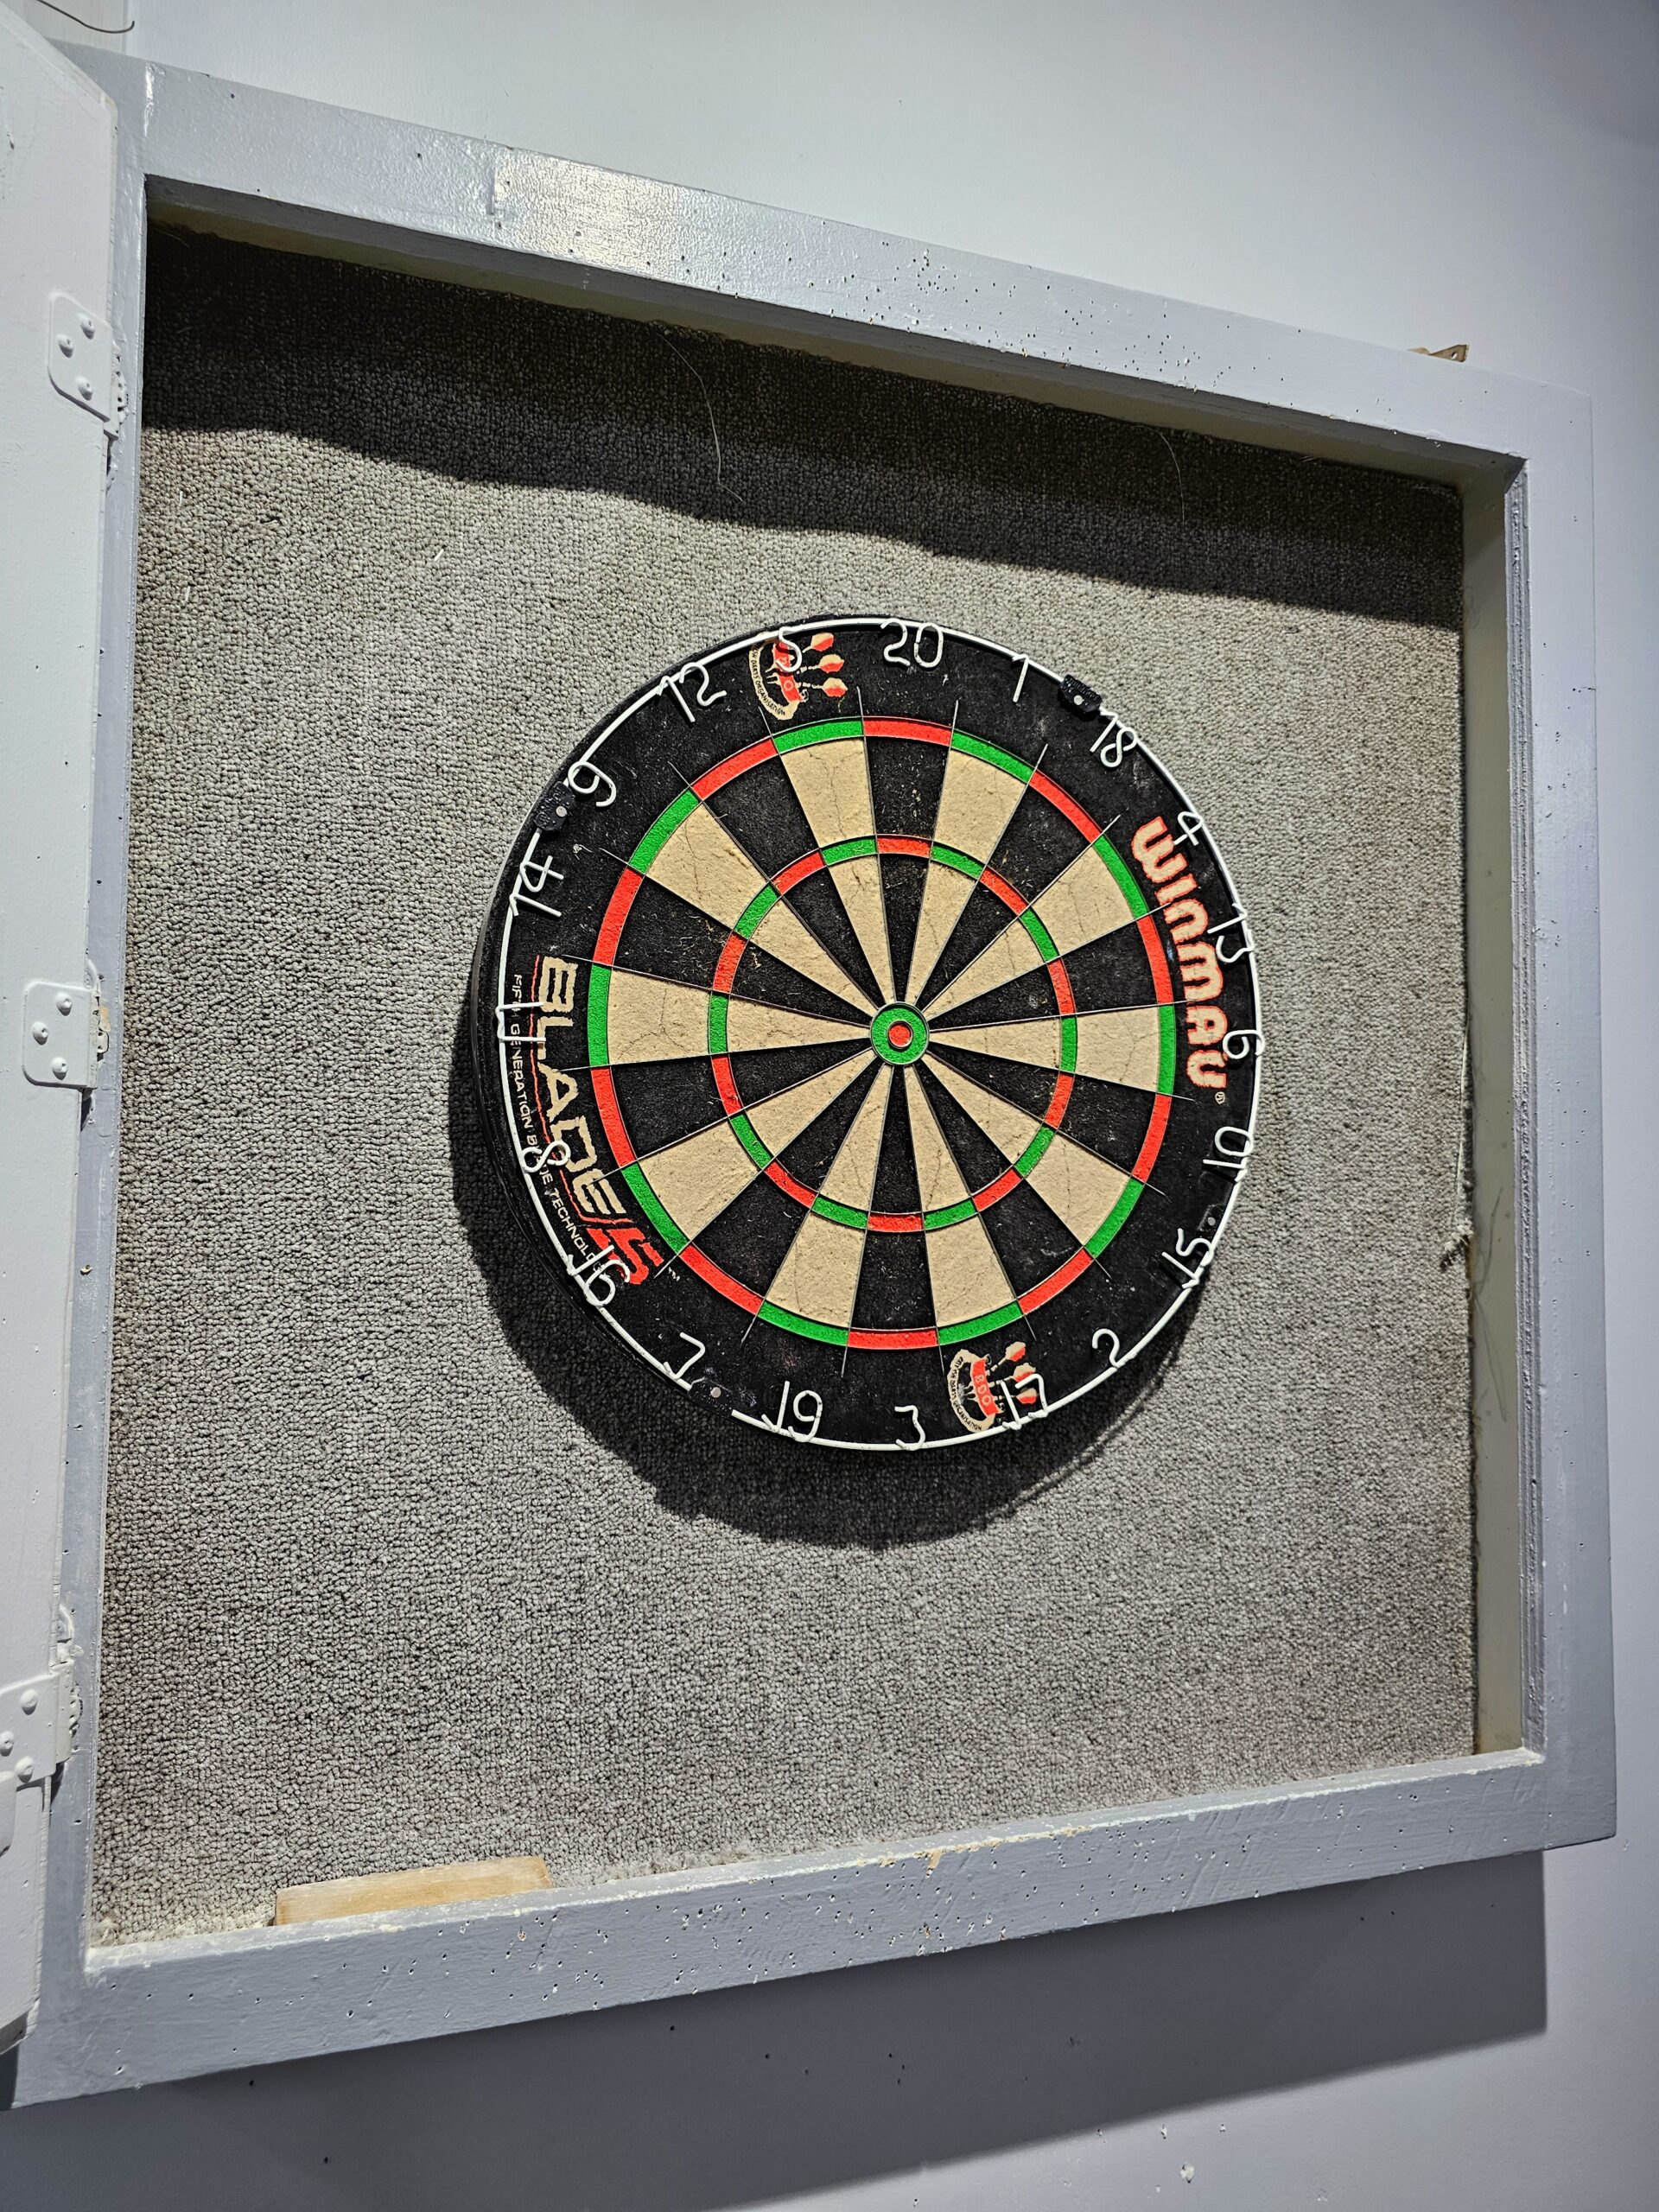 A dartboard is framed by a square of carpeting on a white wall.